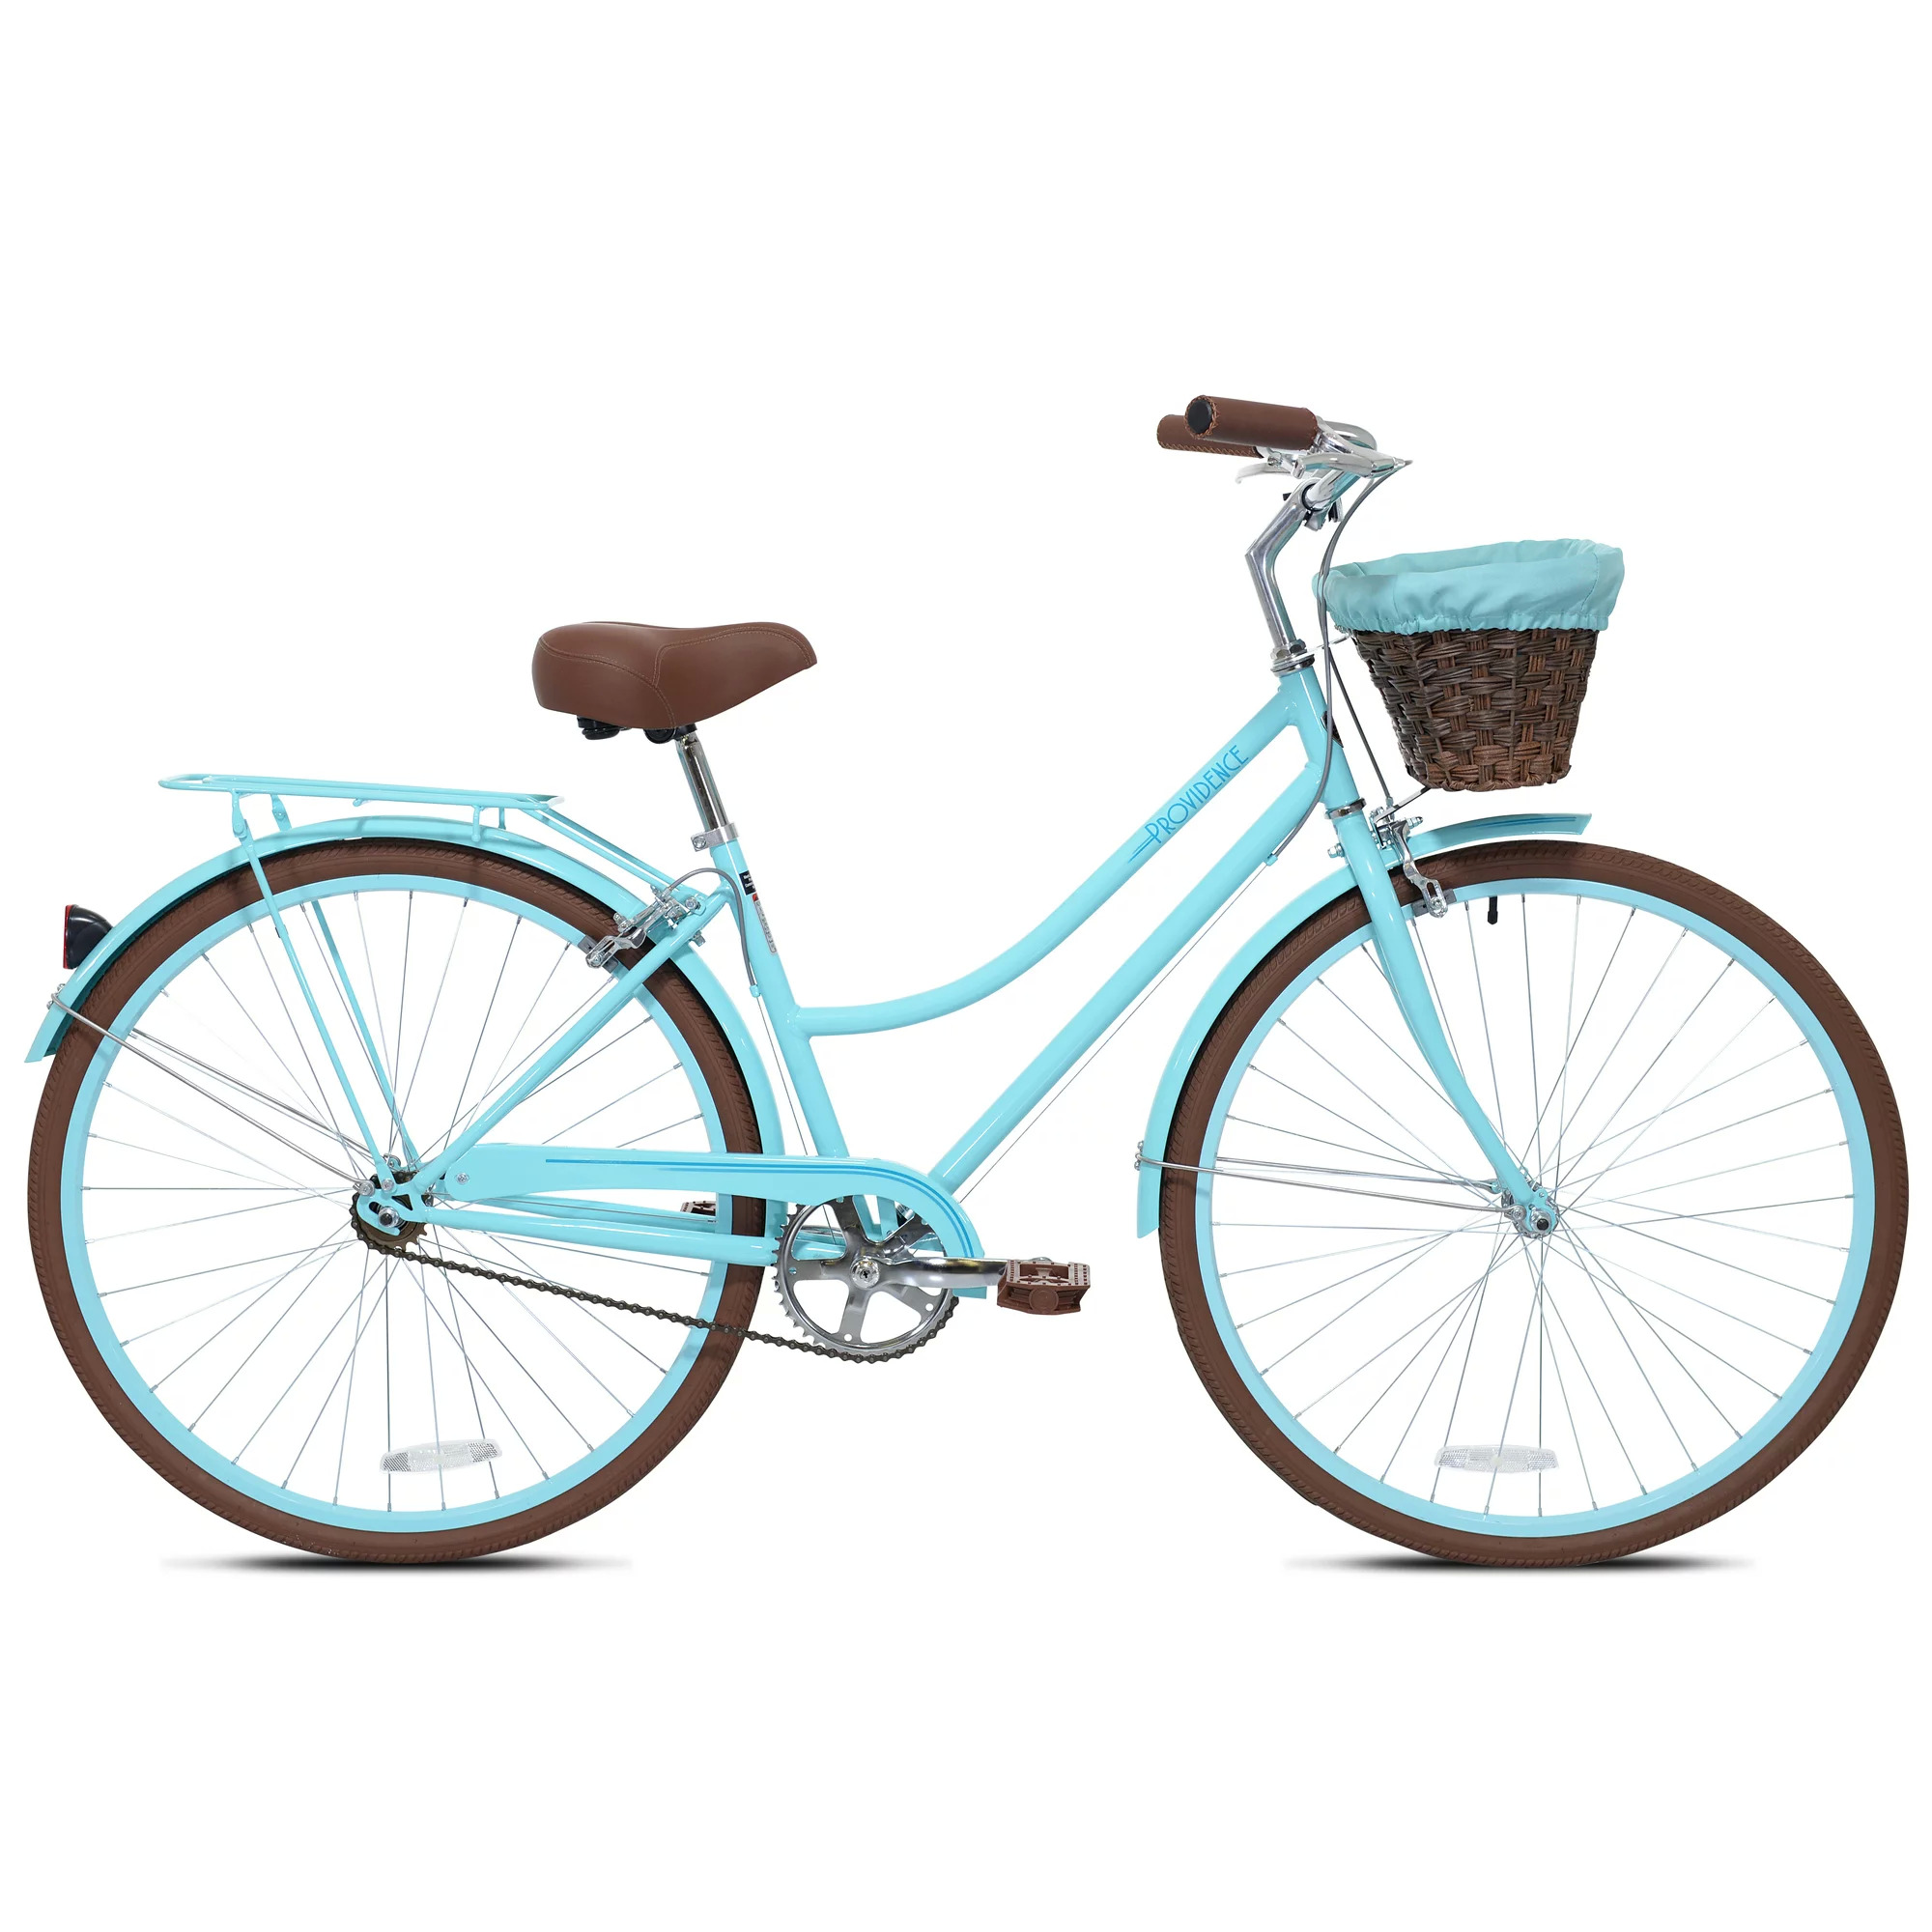 700C Kent Providence Womens' Cruiser Bike w/ Front Basket (Light Blue and Brown) $98 + Free Shipping